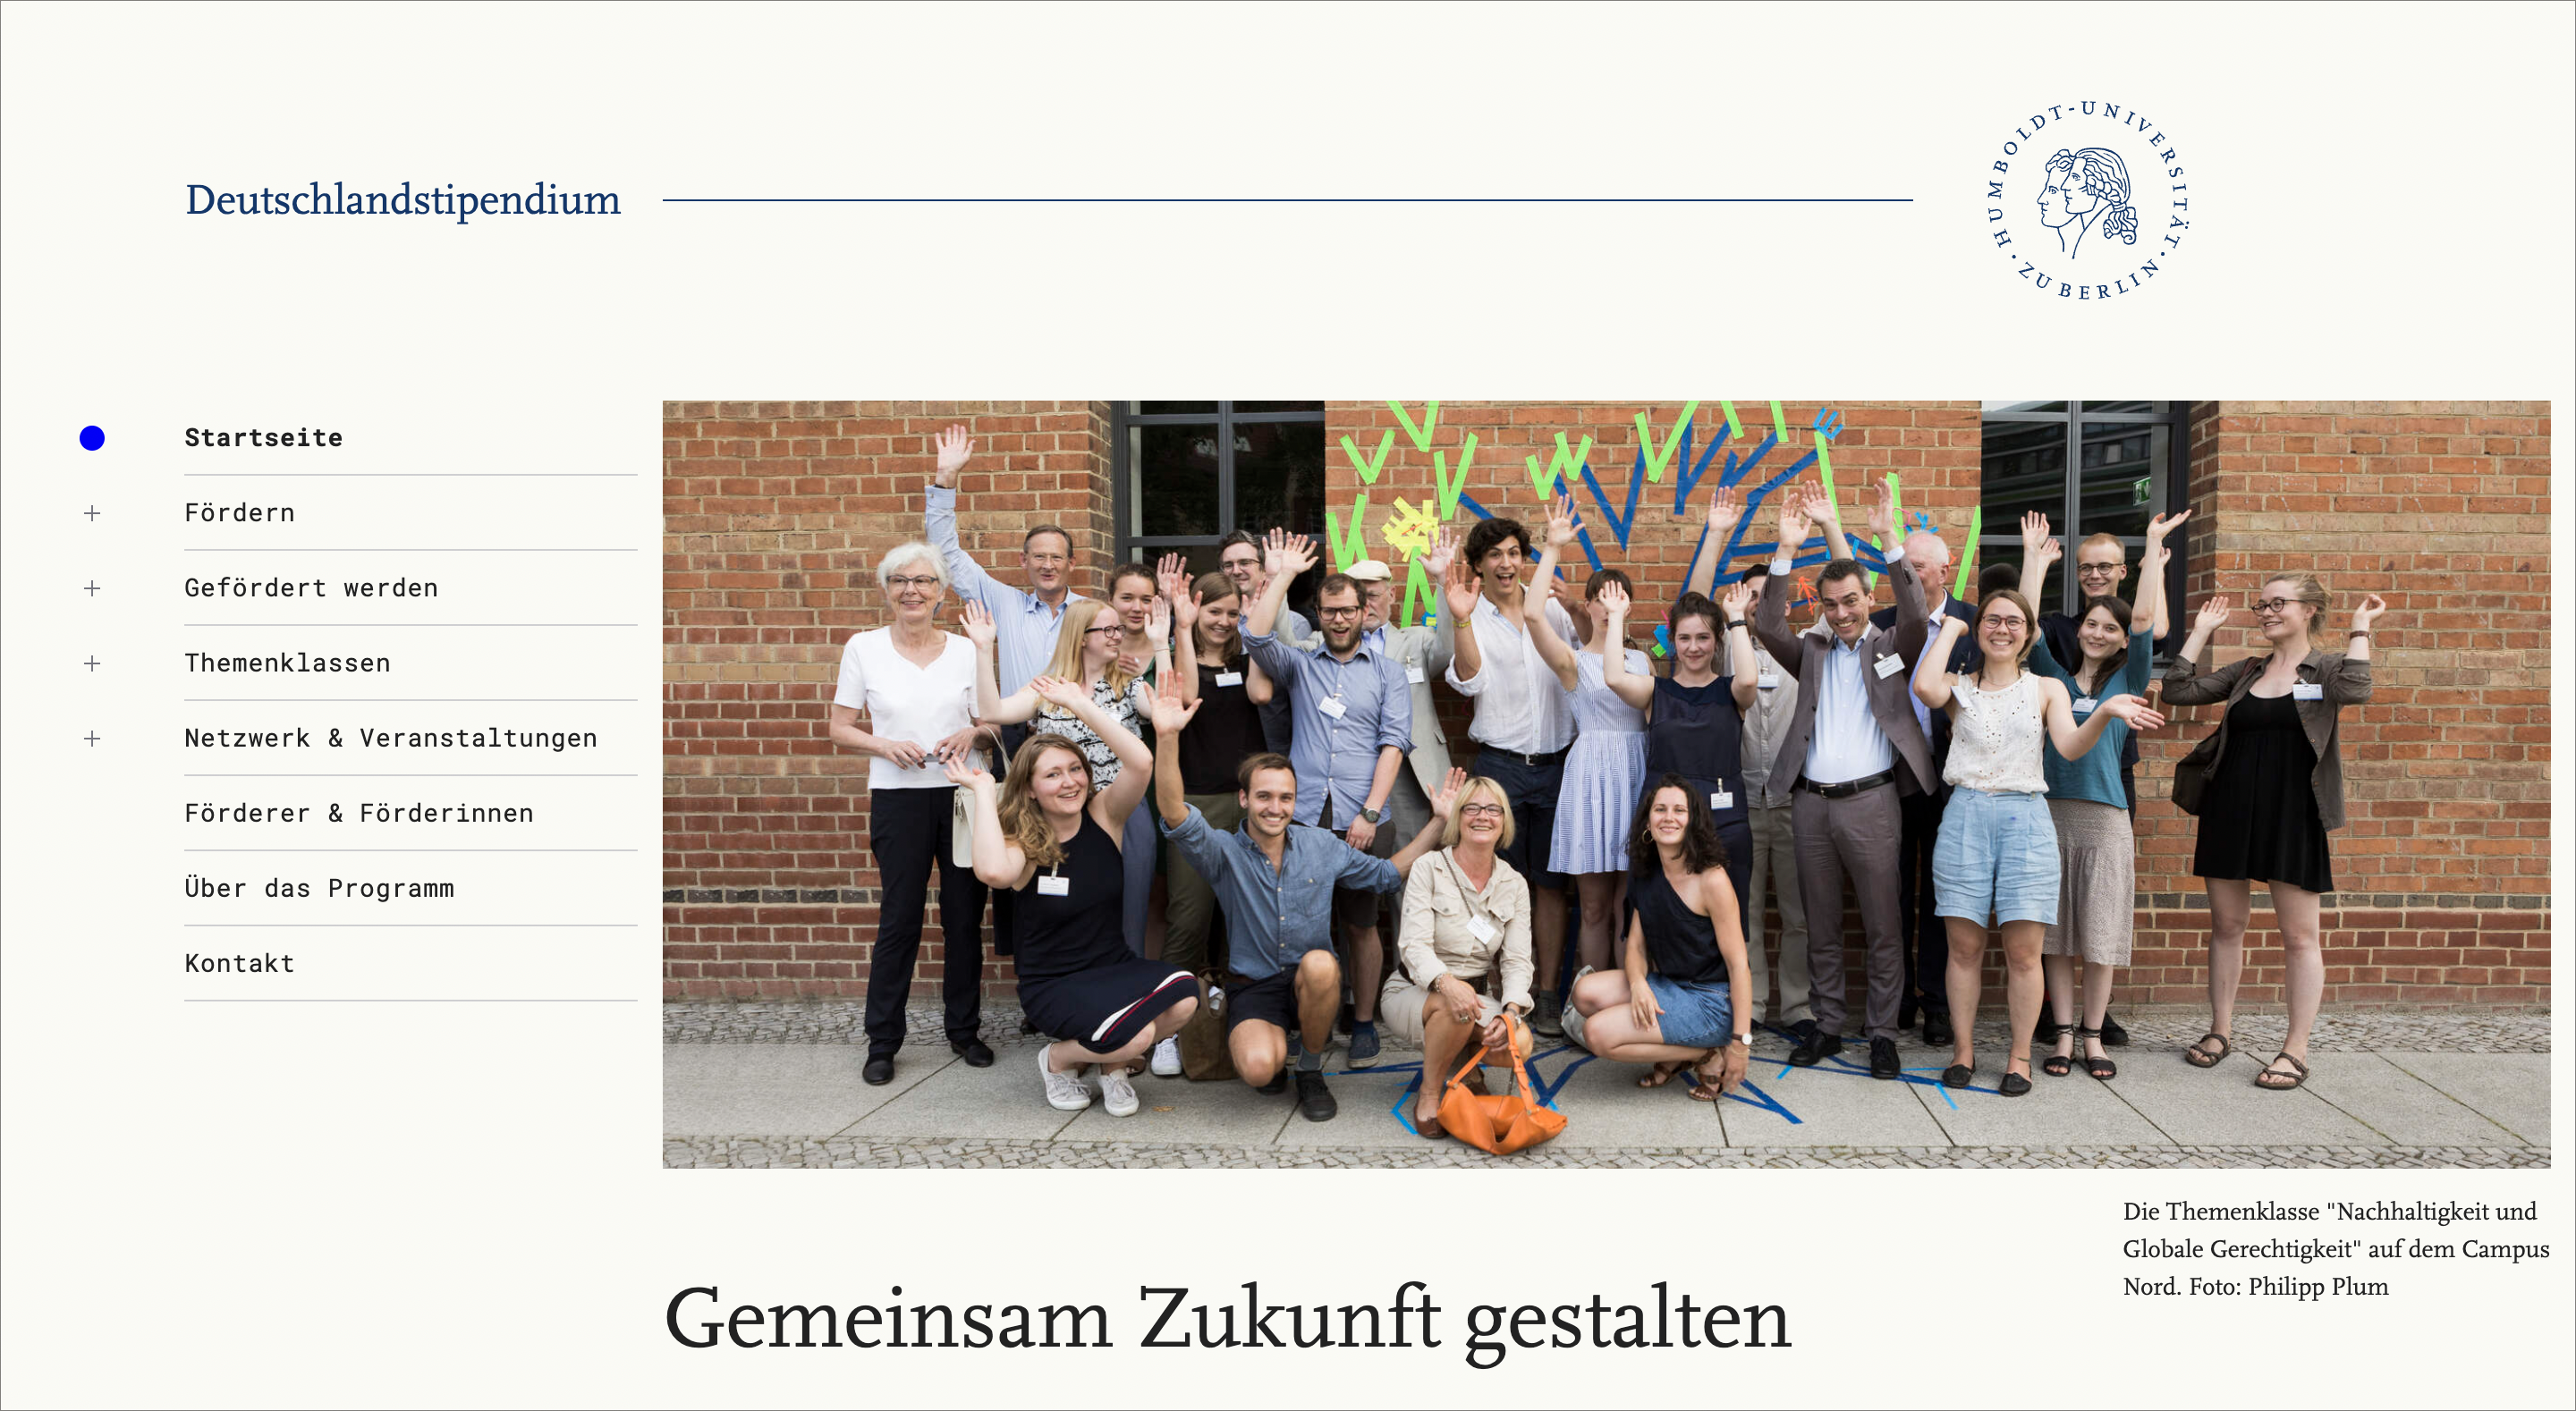 A clean and classic startpage design for Deutschlandstipendium at Humboldt university with a serif font headline. The header is reduced to Deutschlandstipendium, a thin line and the seal of Humboldt university. The menu is on the left. The major part of the space is occupied by a photo of a happy group of students without overlay.